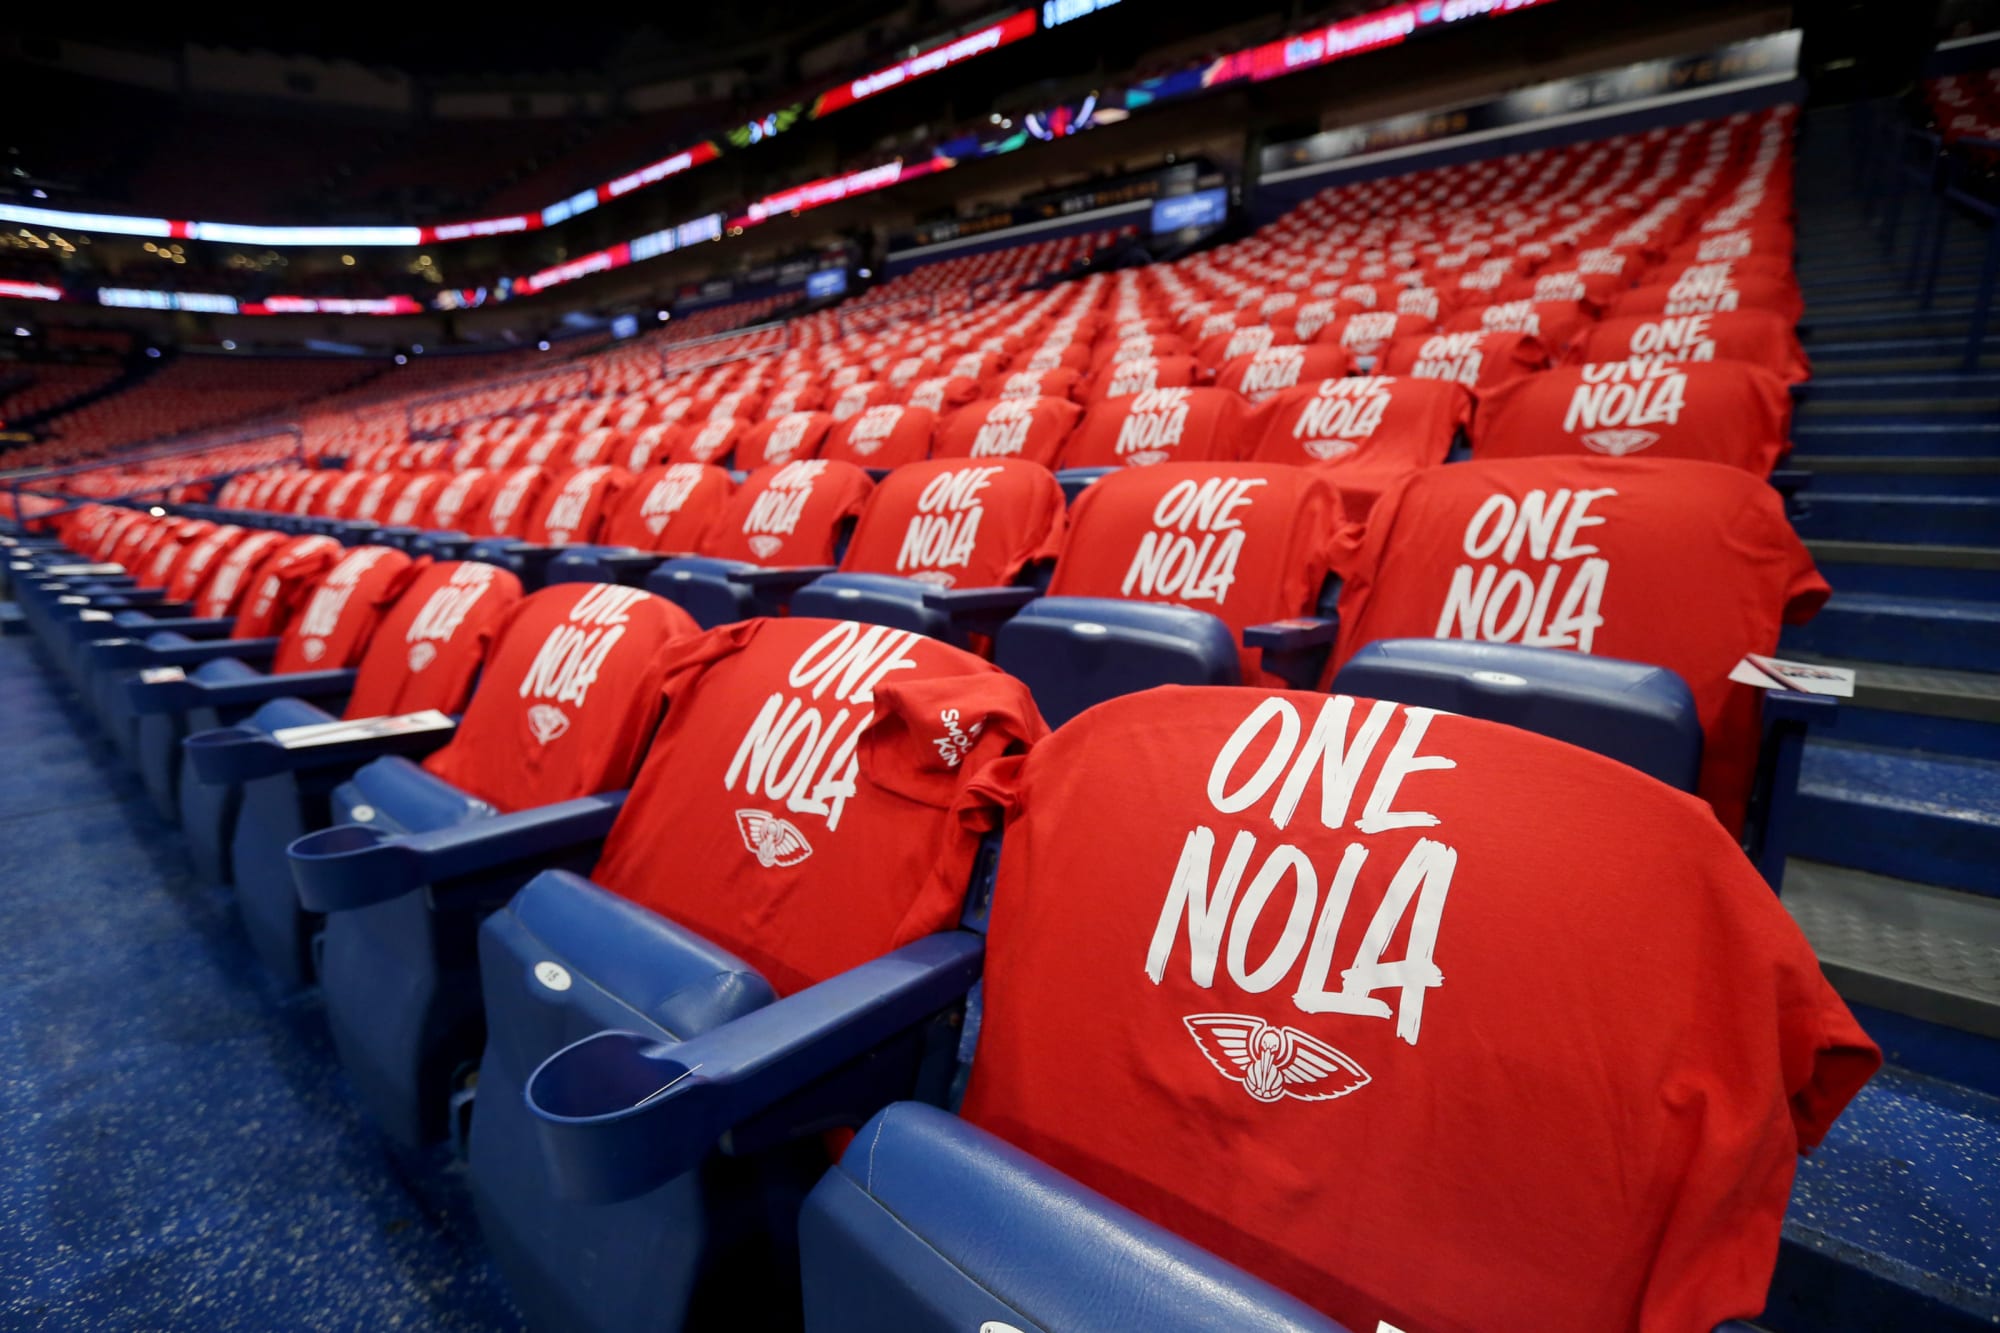 Where did the New Orleans Pelicans rank in attendance?